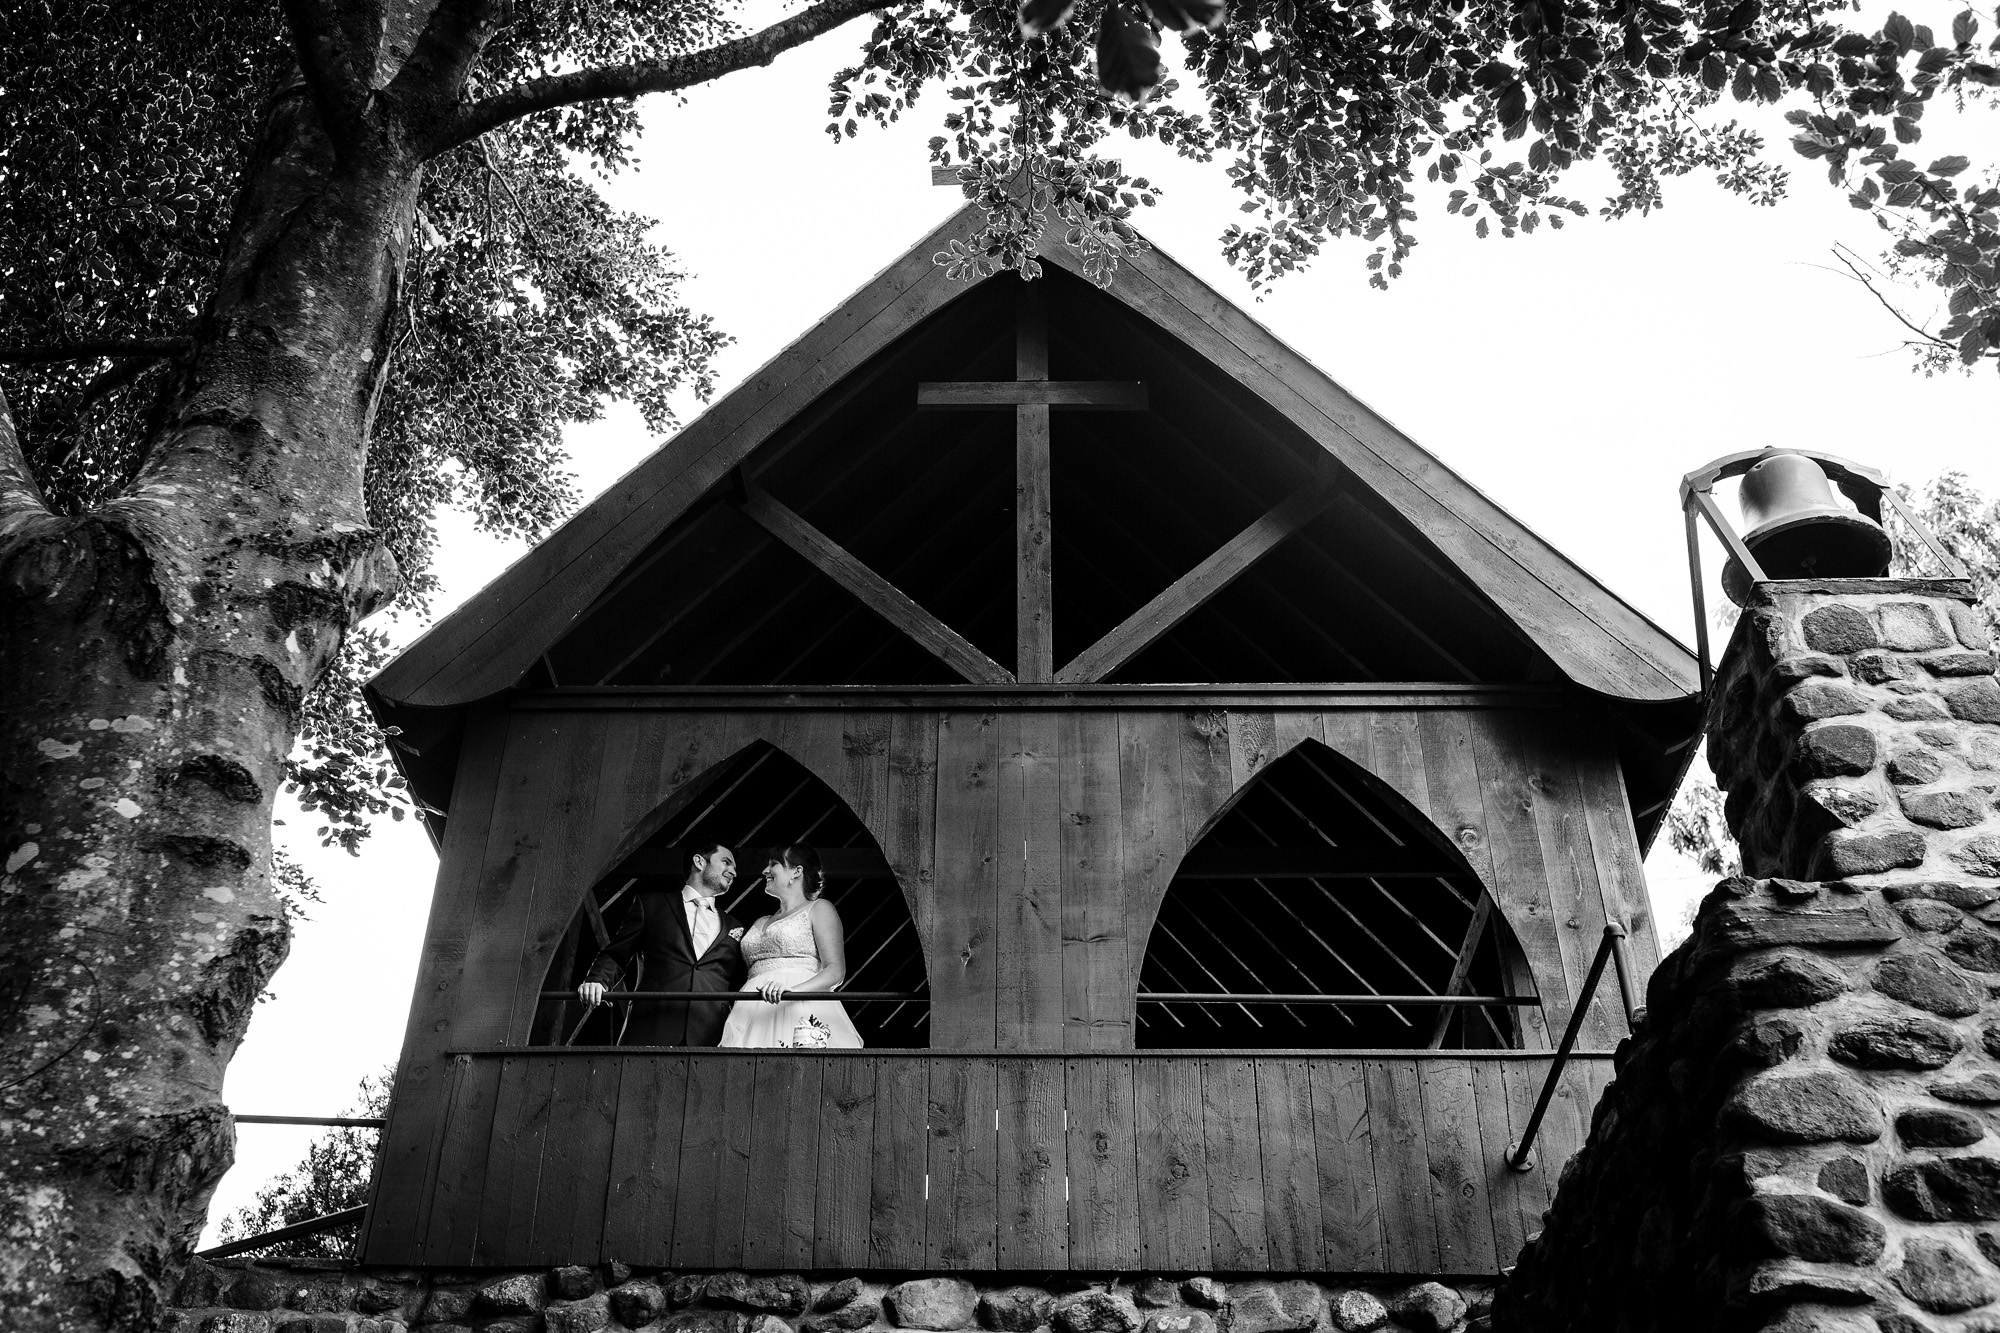 Wedding portraits of the bride and groom taken in the gardens at the Vesper Hill Children's Chapel in Rockport Maine